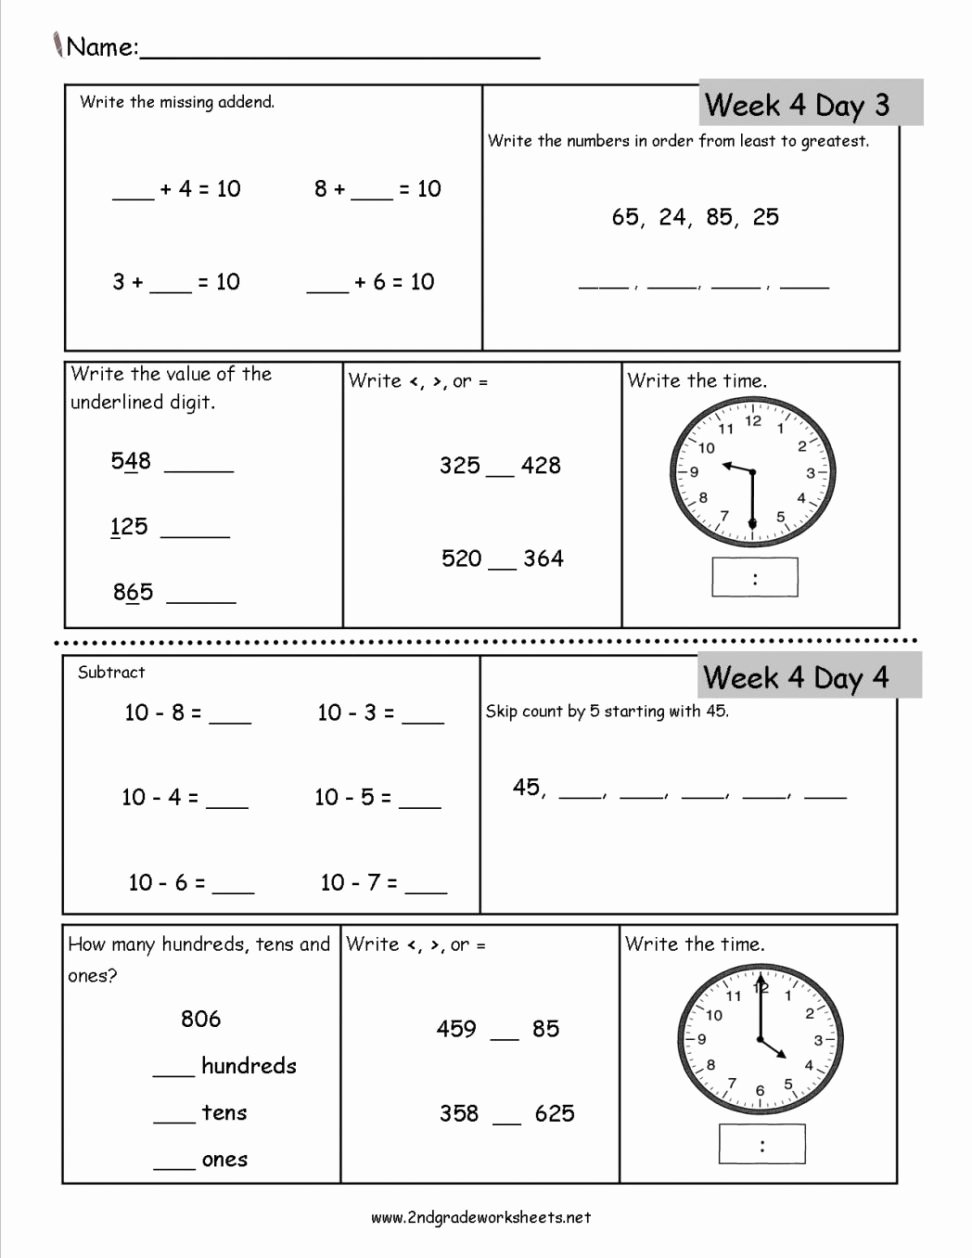 Print Out Algebra Worksheets New Worksheet Fun Math Puzzle Worksheets for Middle School